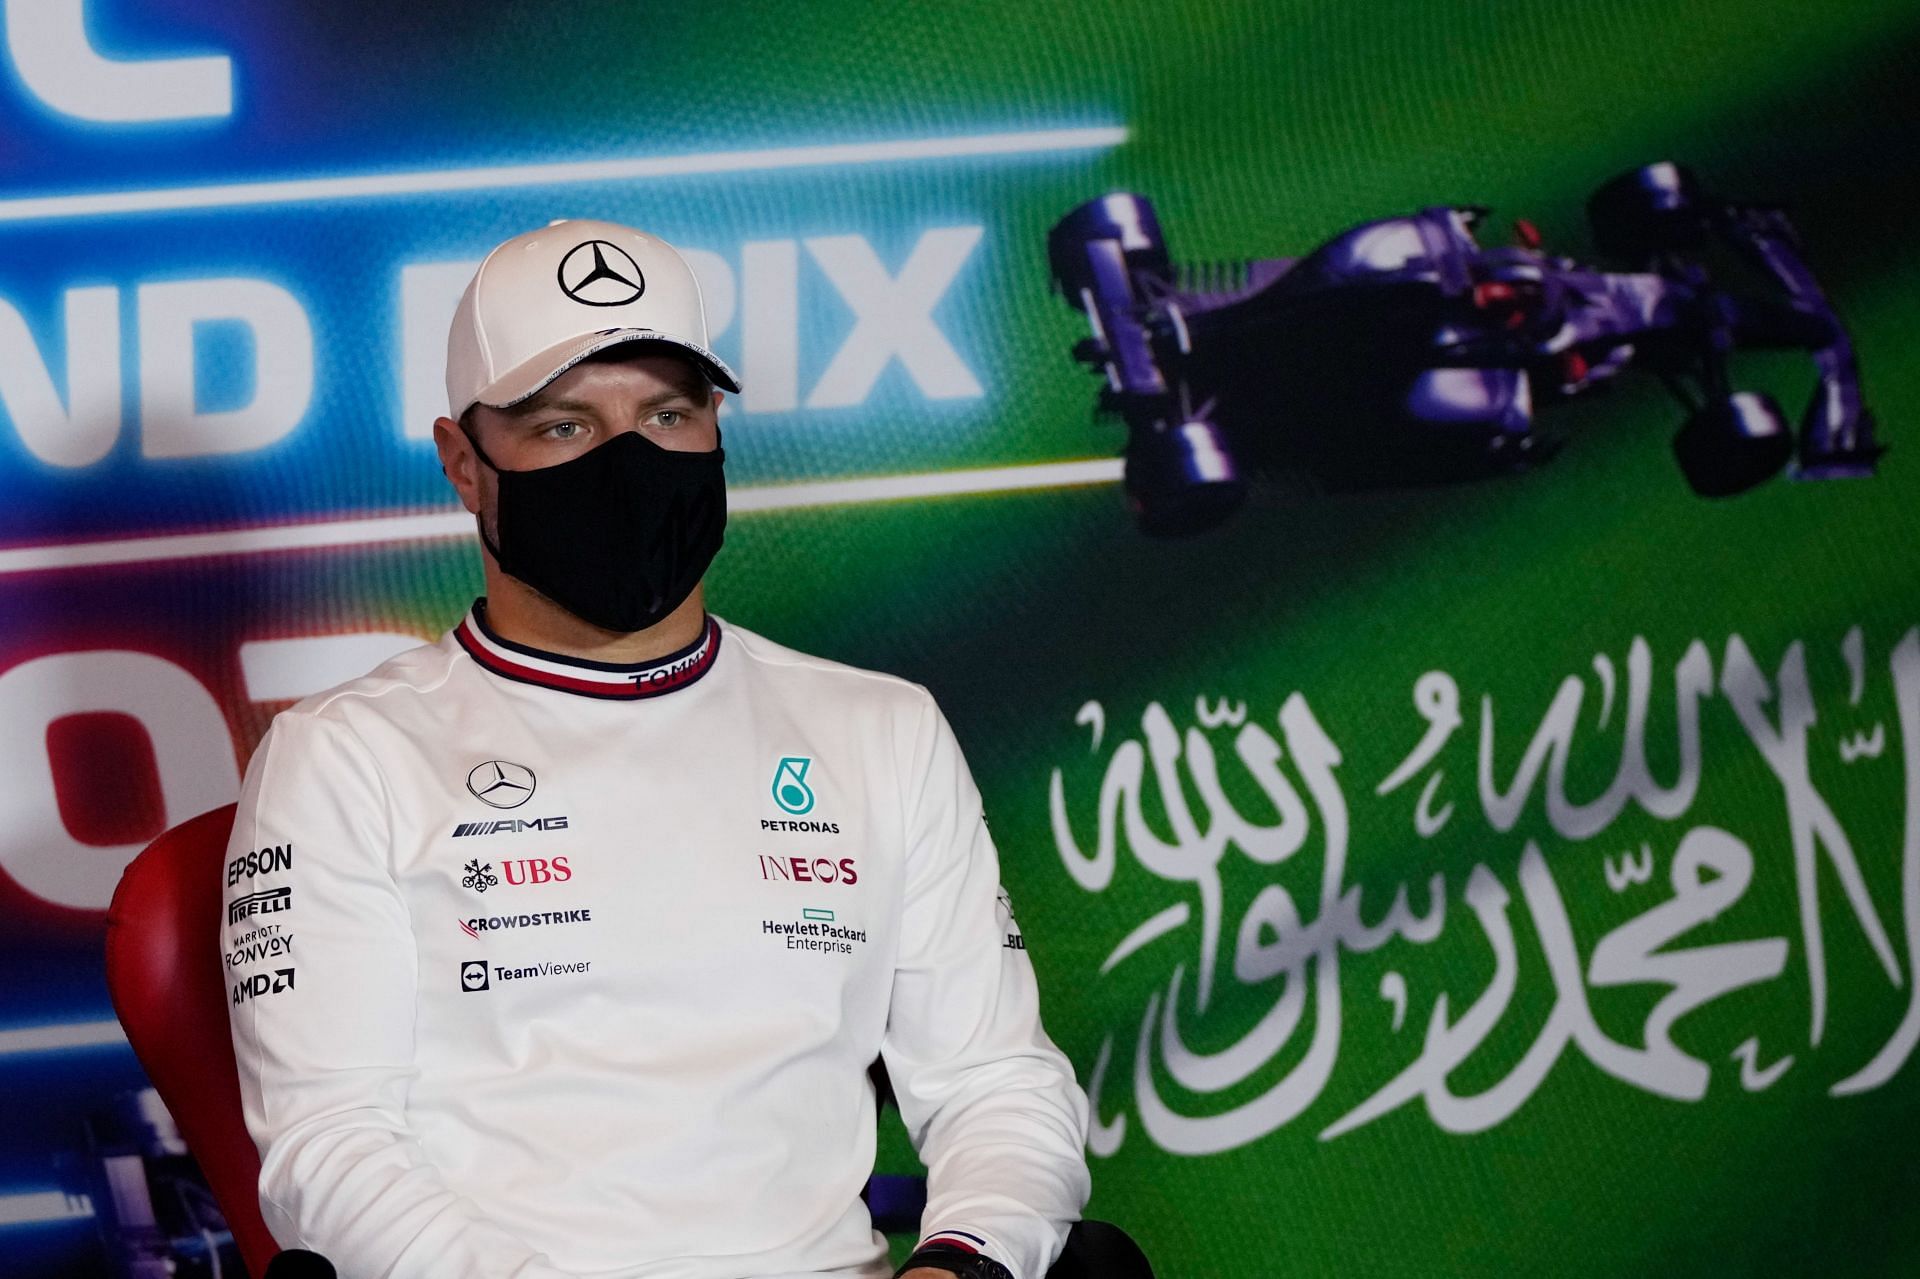 Valtteri Bottas talks in the Drivers Press Conference during previews ahead of the 2021 Saudi Arabia Grand Prix. (Photo by Hassan Ammar - Pool/Getty Images)